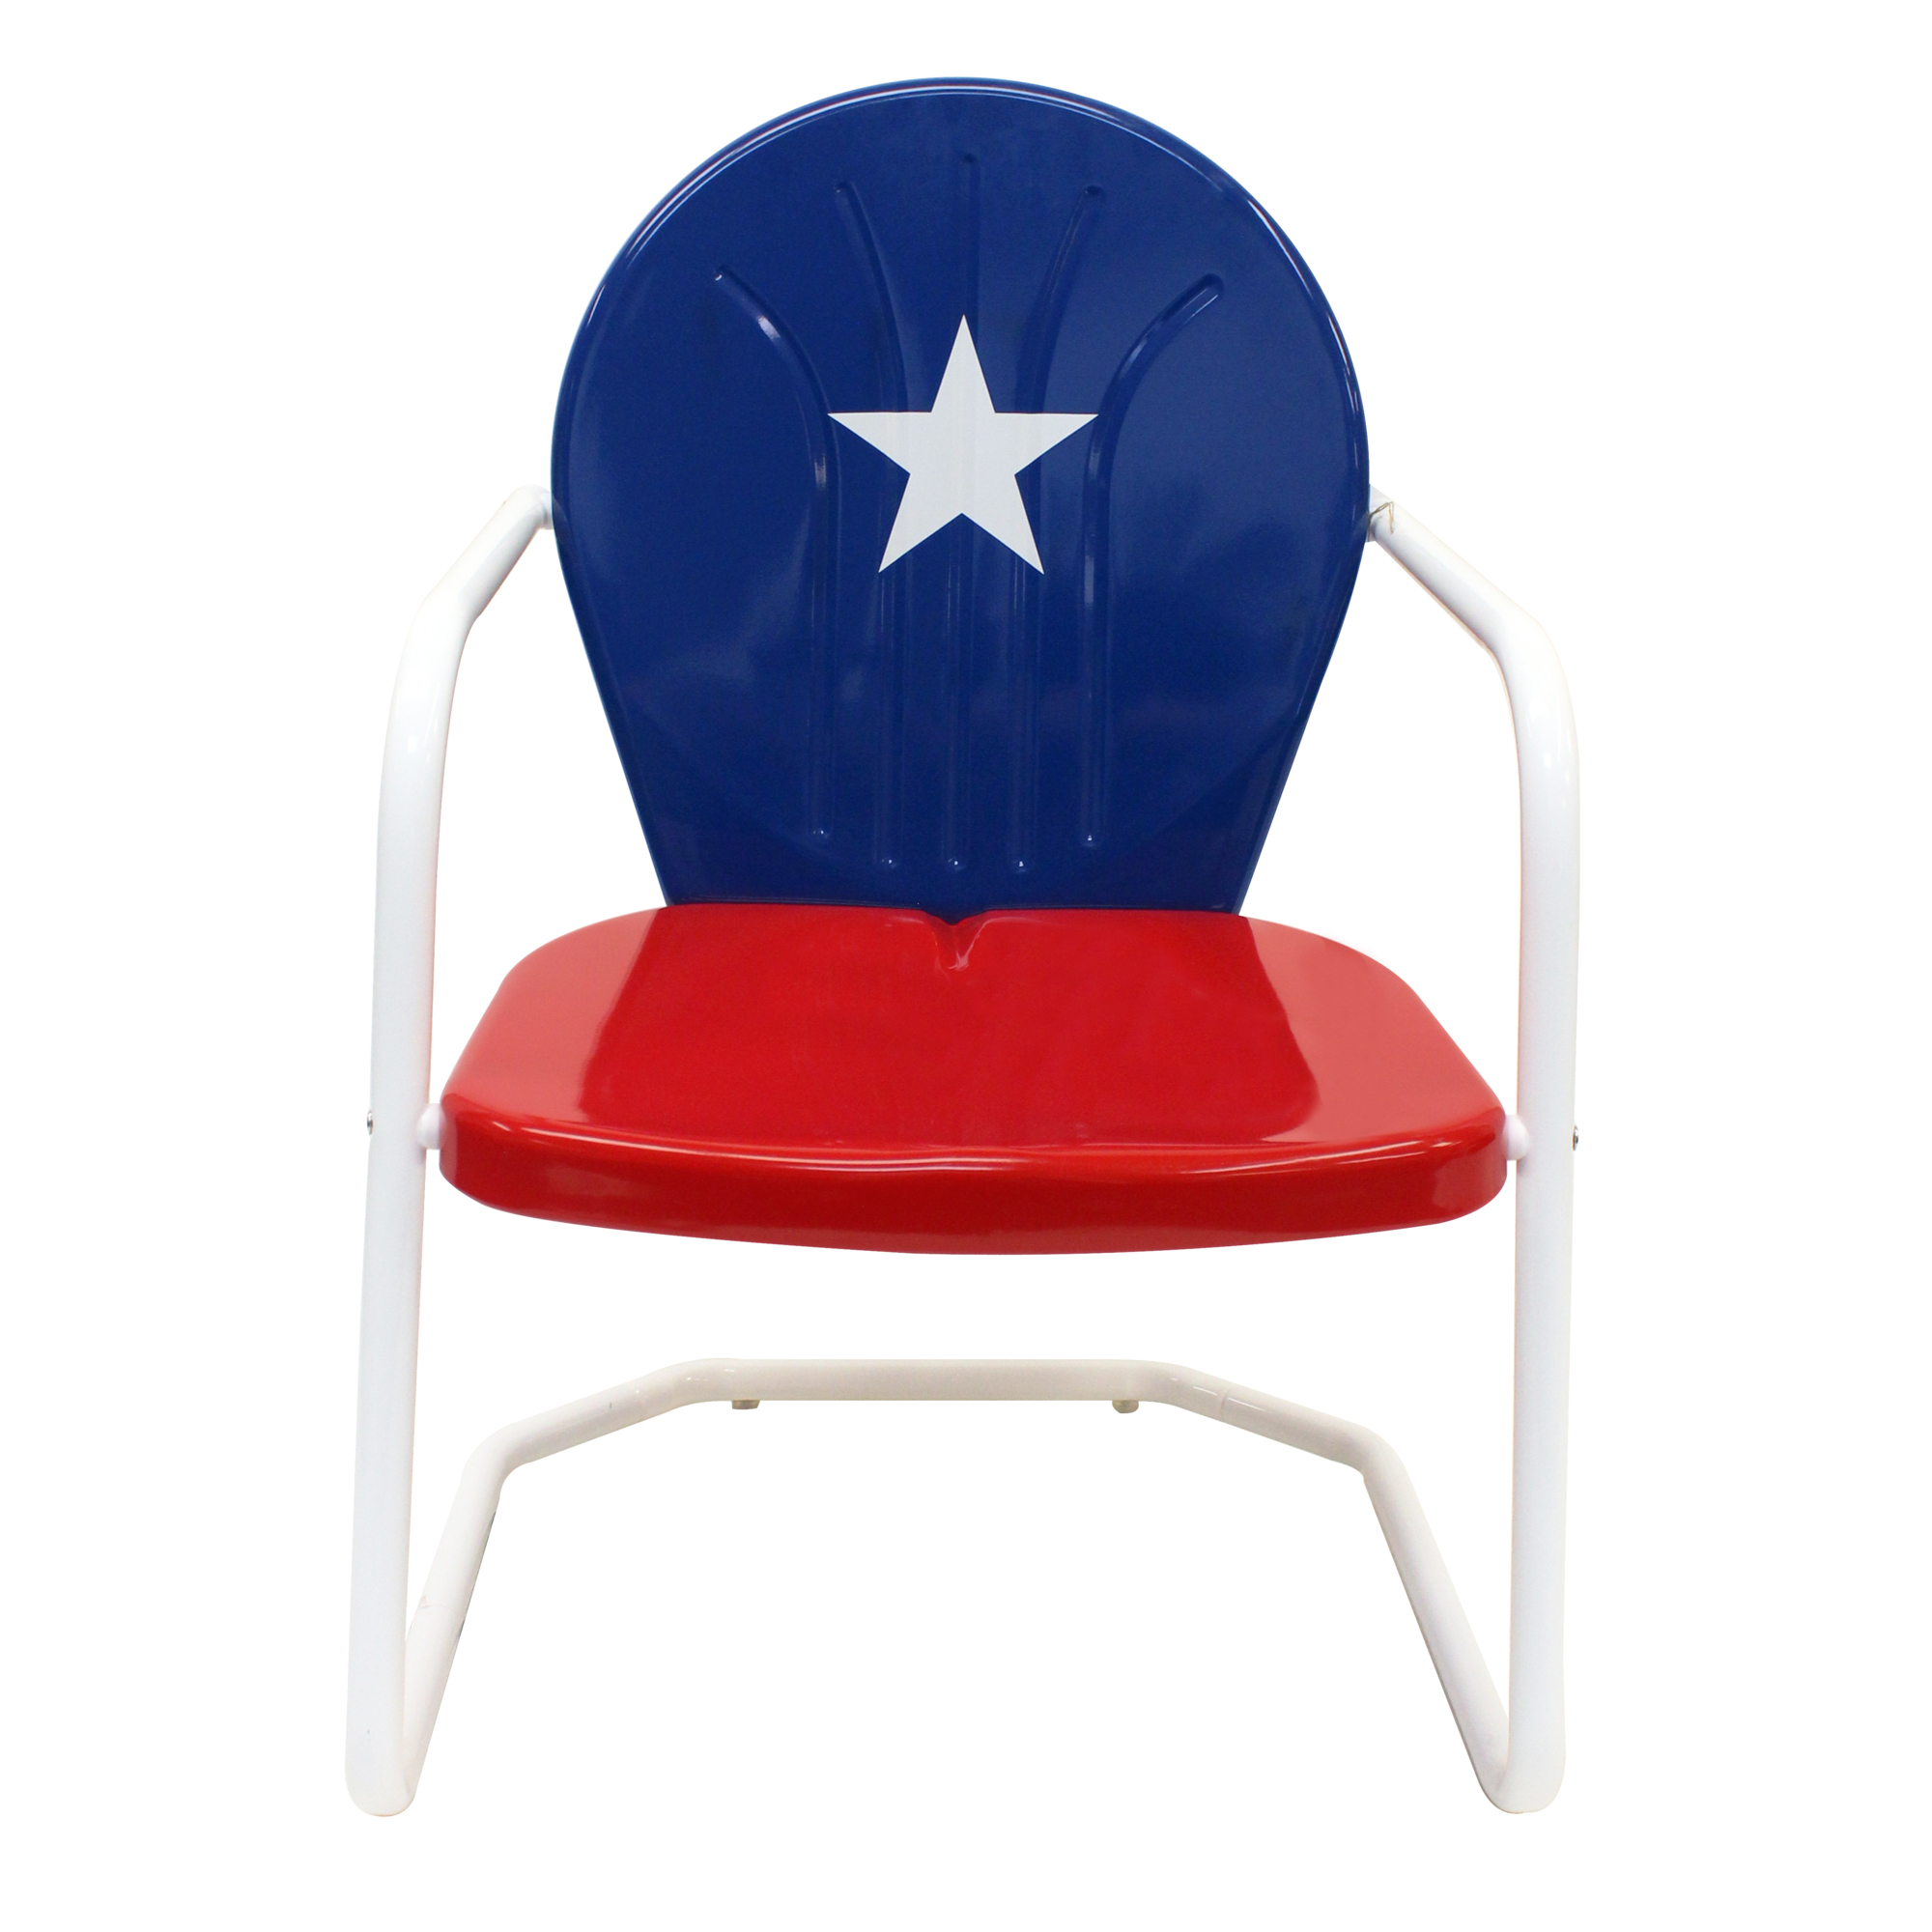 Leigh Country, Texas Retro Metal Chair, Primary Color Other, Material Metal, Width 24.8 in, Model TX 93488